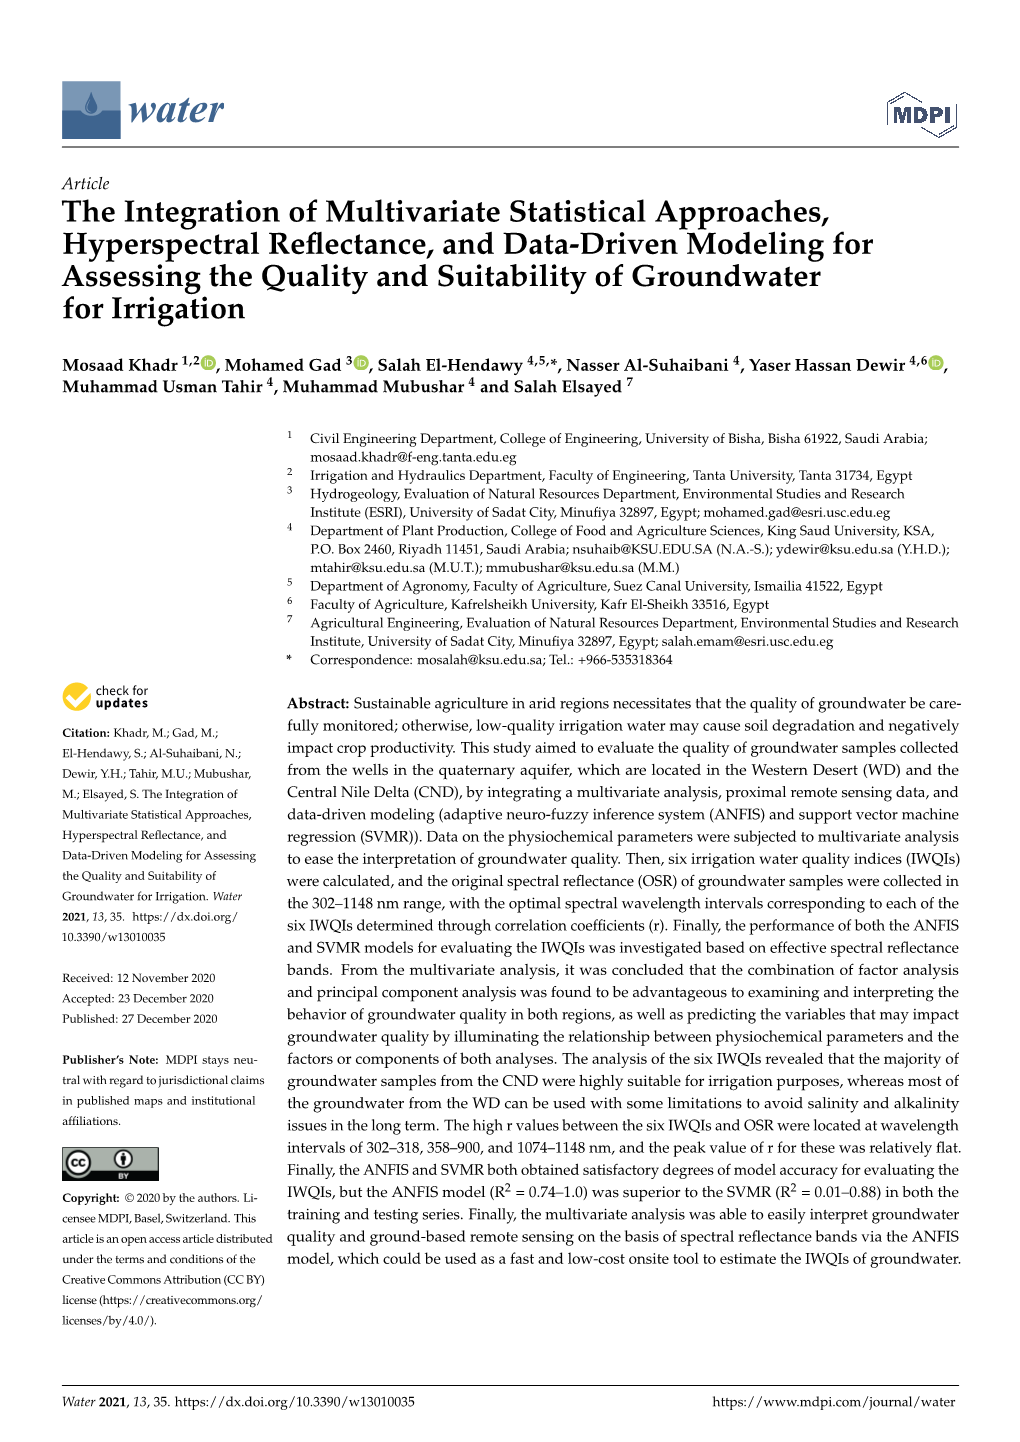 The Integration of Multivariate Statistical Approaches, Hyperspectral Reflectance, and Data-Driven Modeling for Assessing the Qu